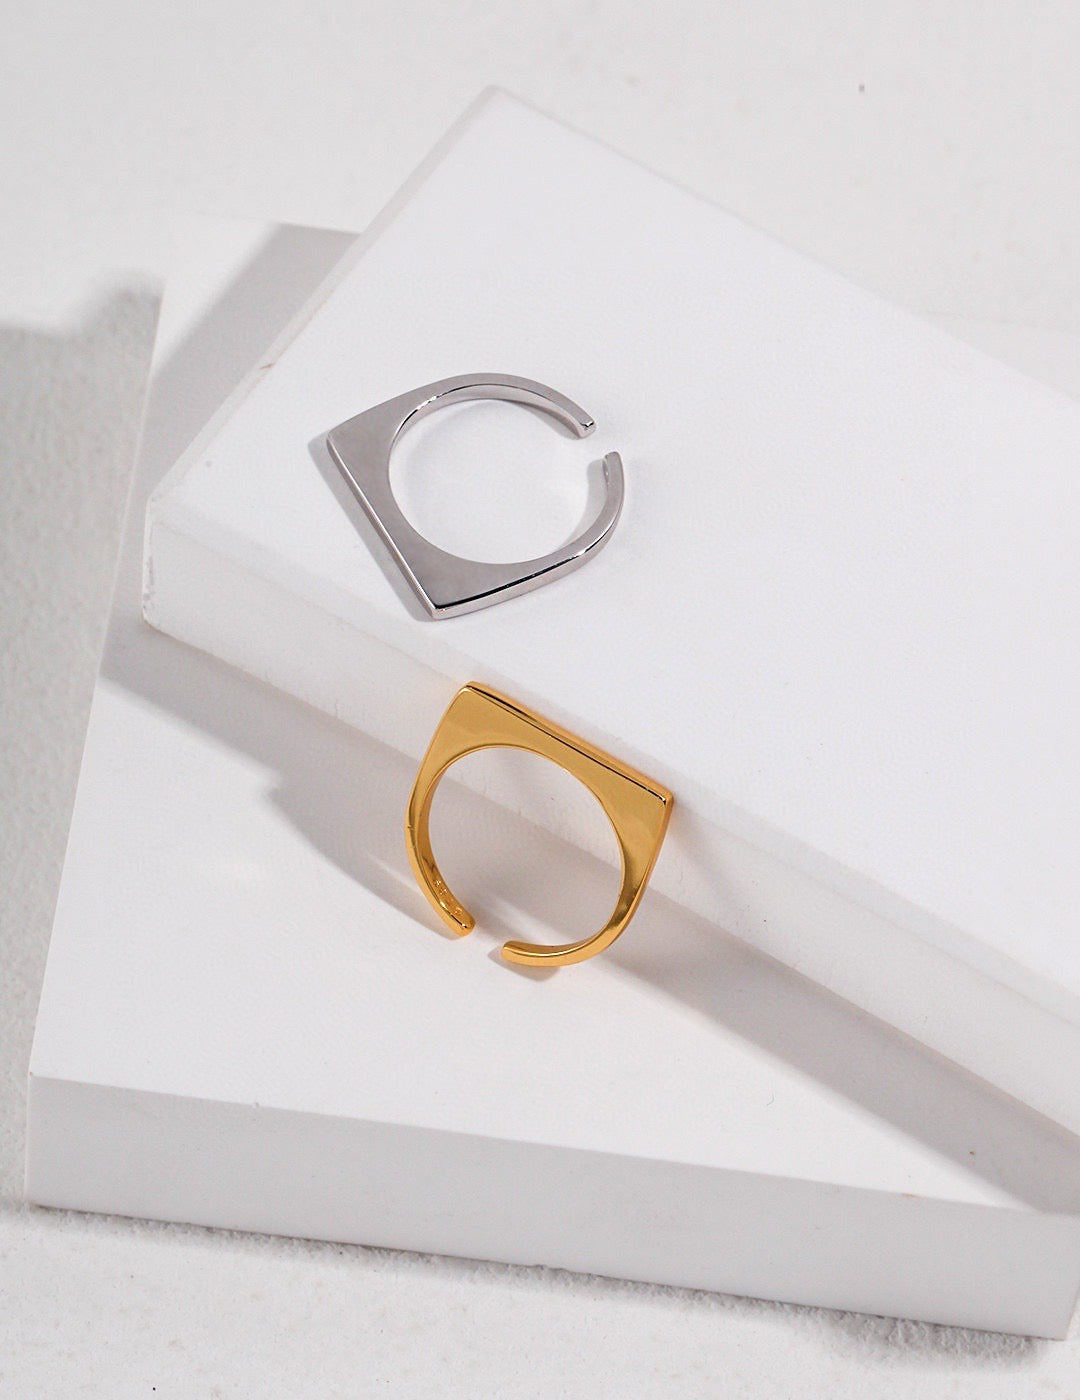 Sterling Silver Simple Ring,Unique Geometric Ring,Shiny Silver Ring,Modern Minimalist Rings 